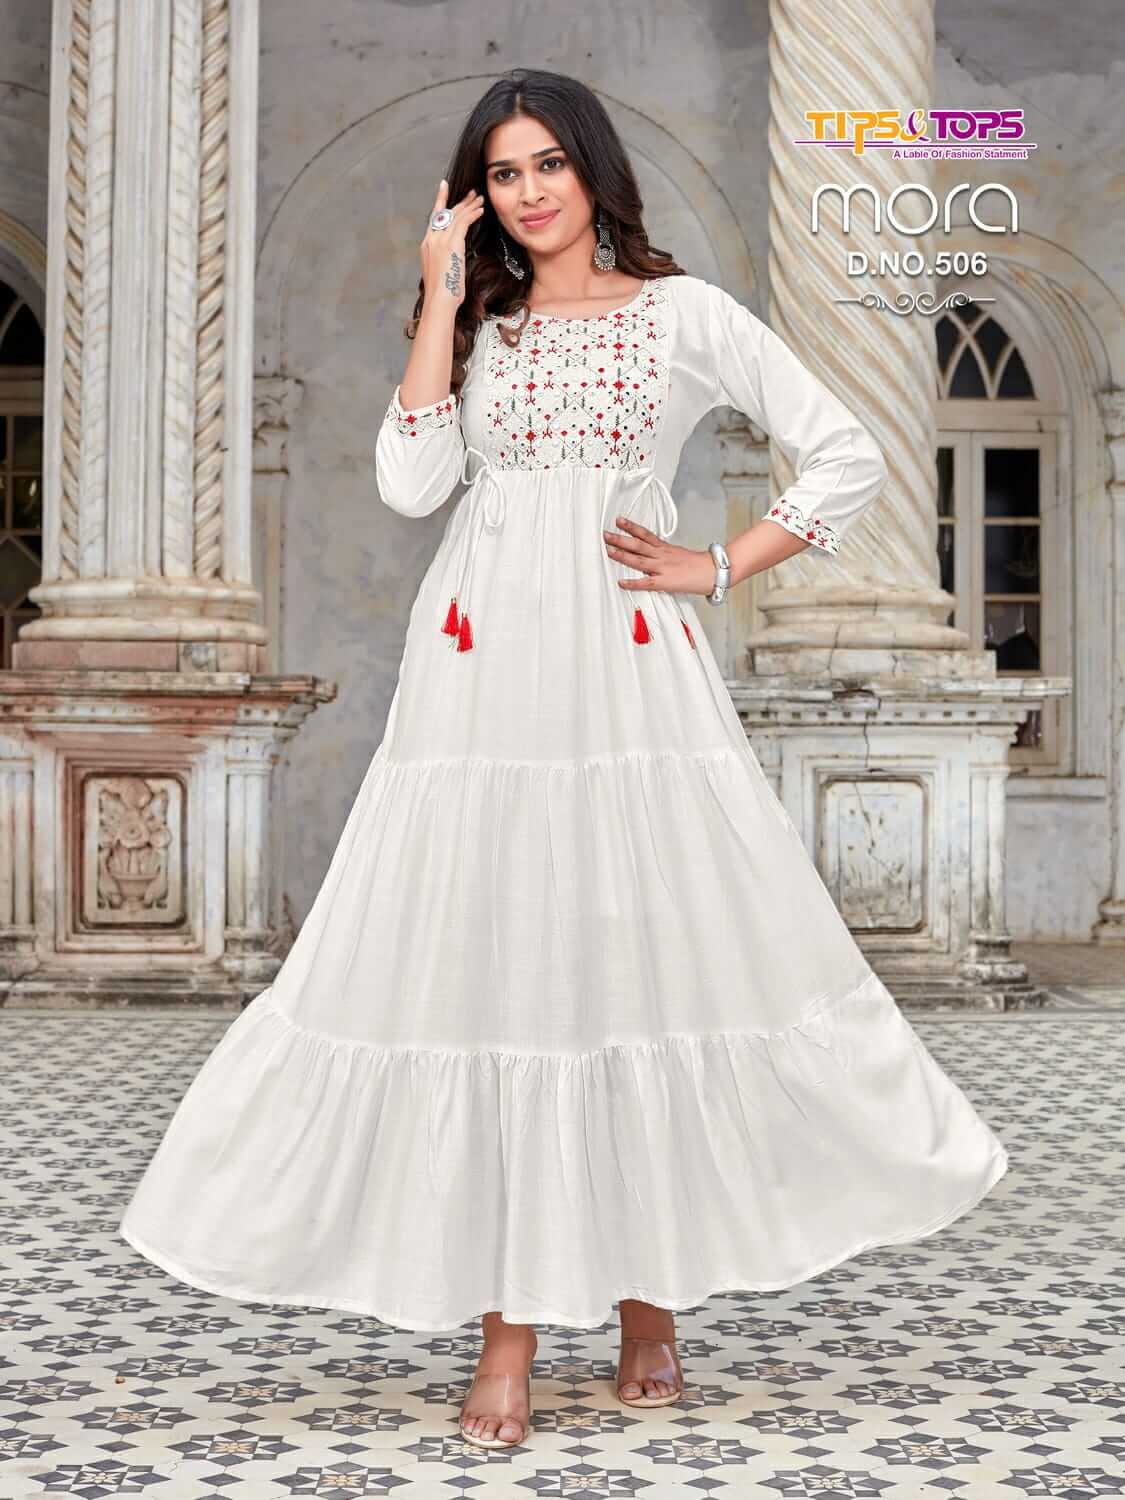 Tips and Tops Mora Vol 5 Gowns Catalog collection 1